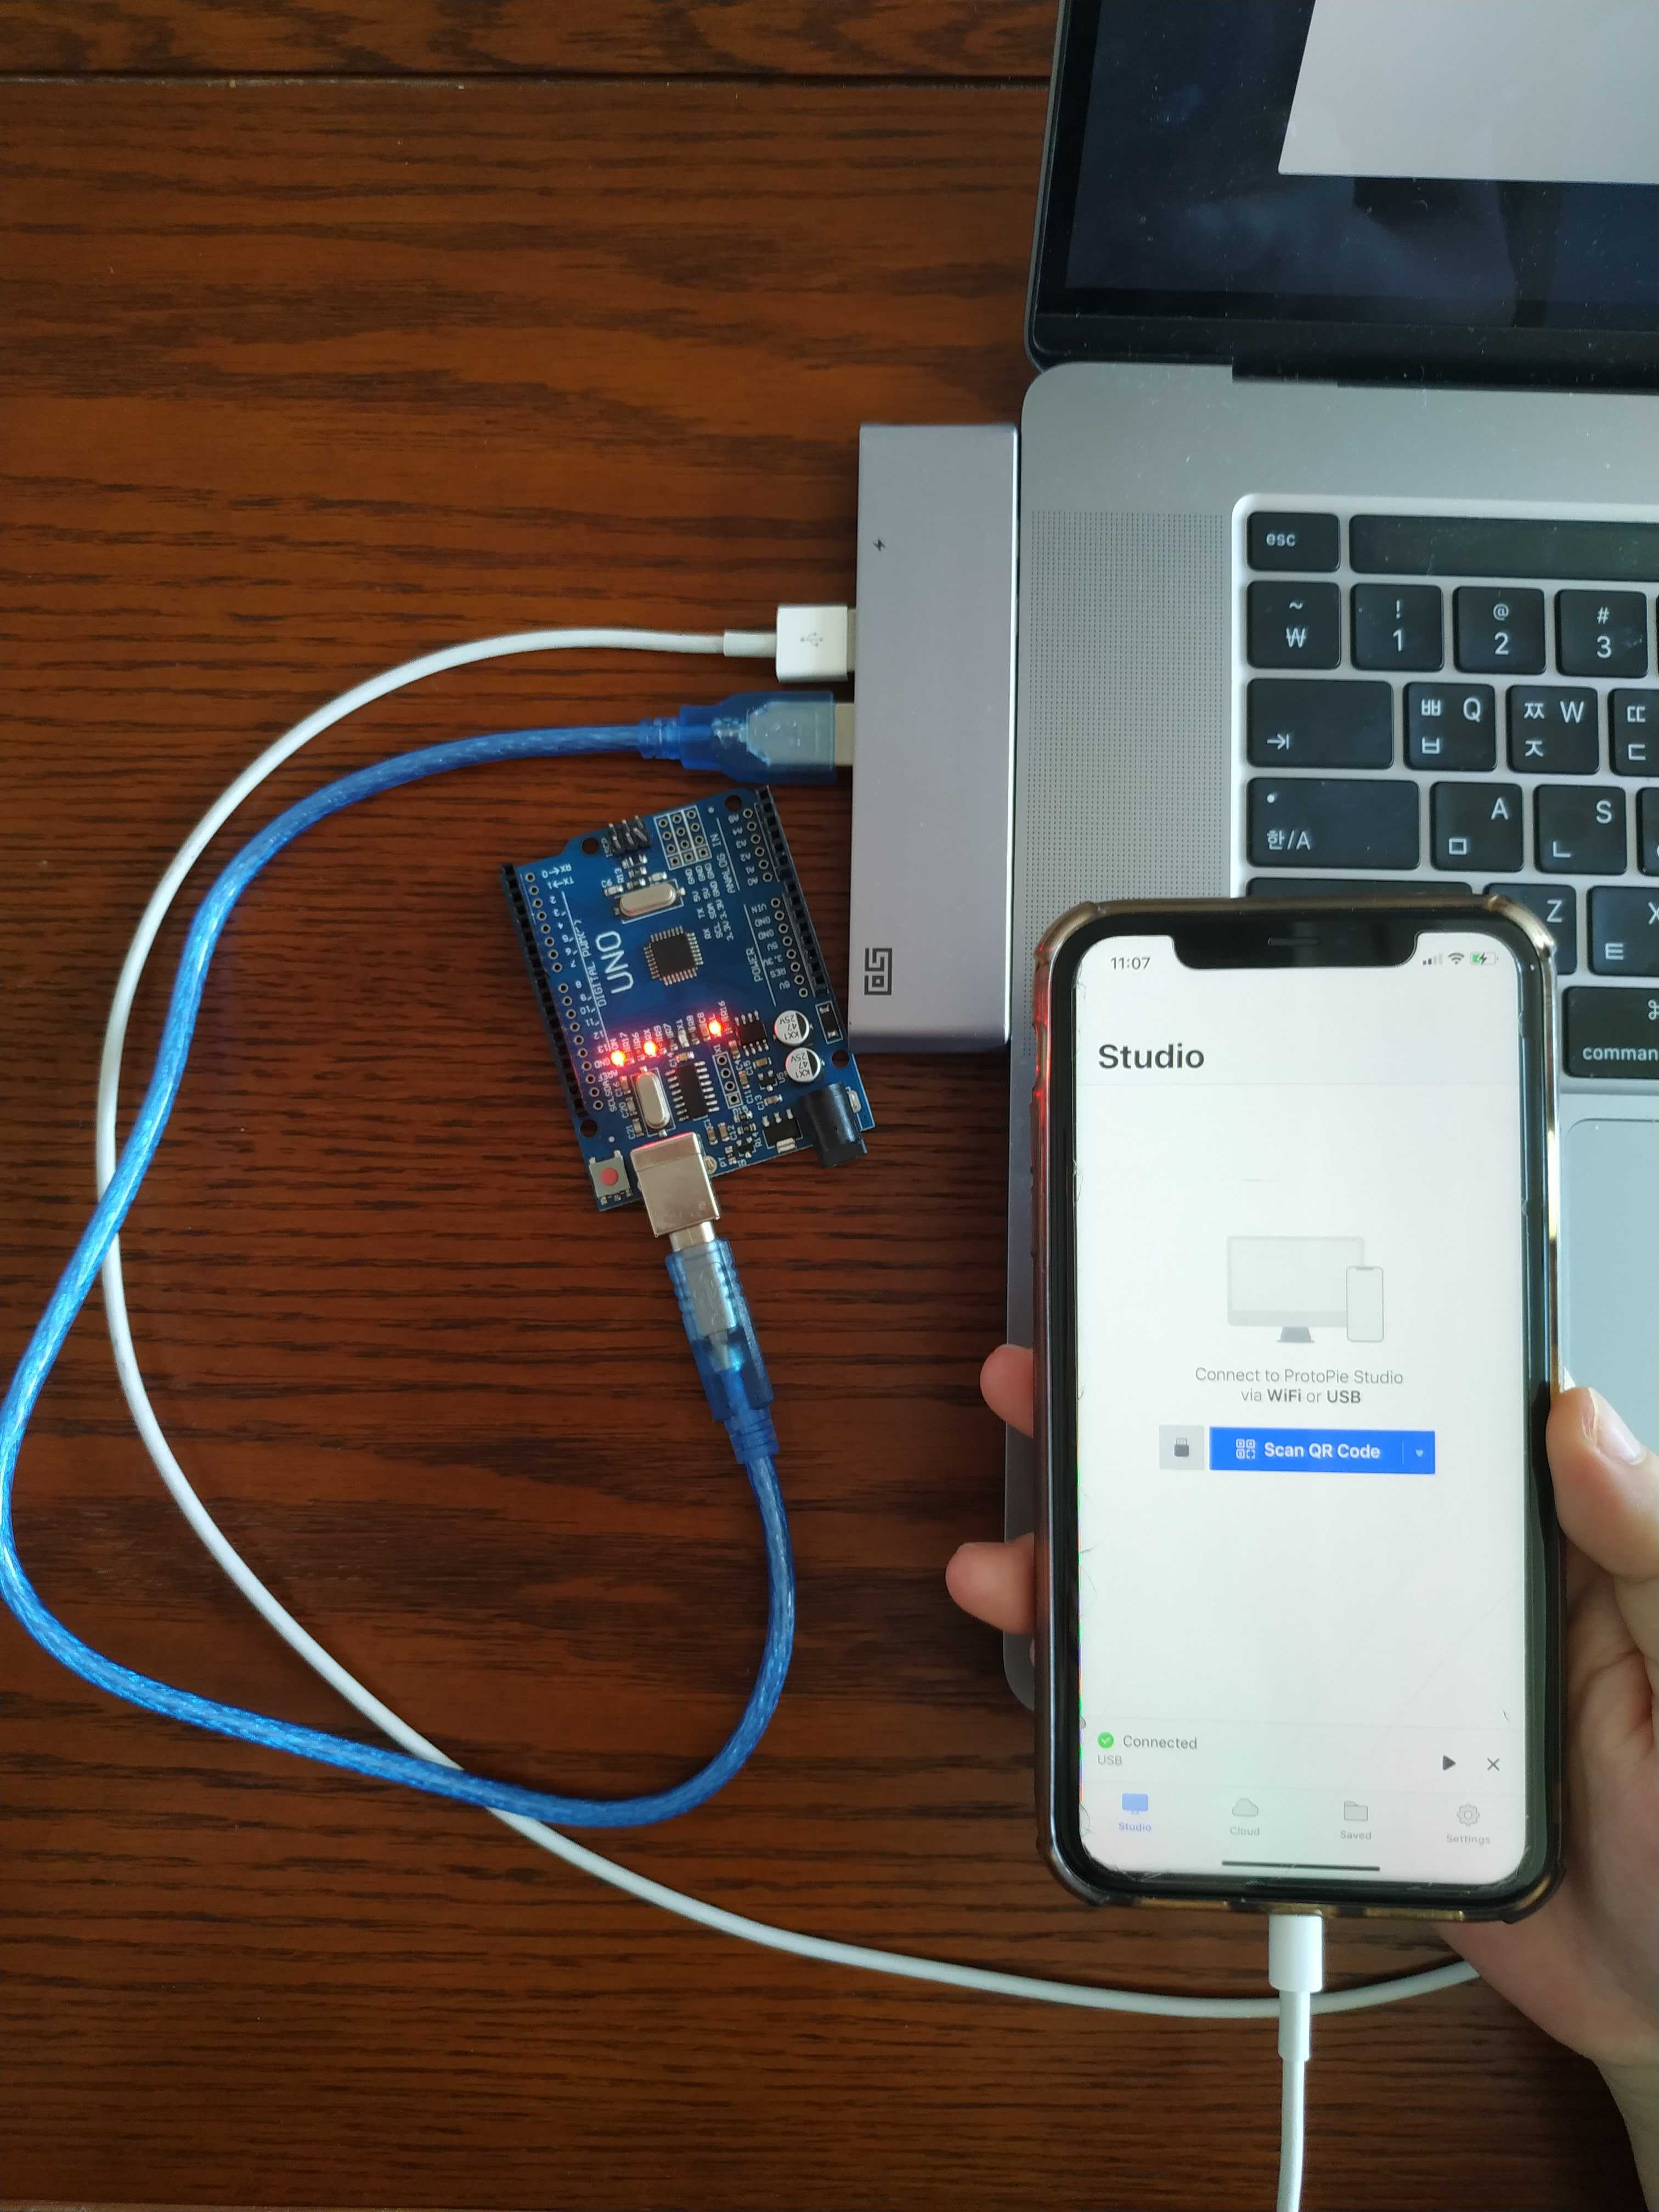 How to connect Arduino and laptop with ProtoPie player